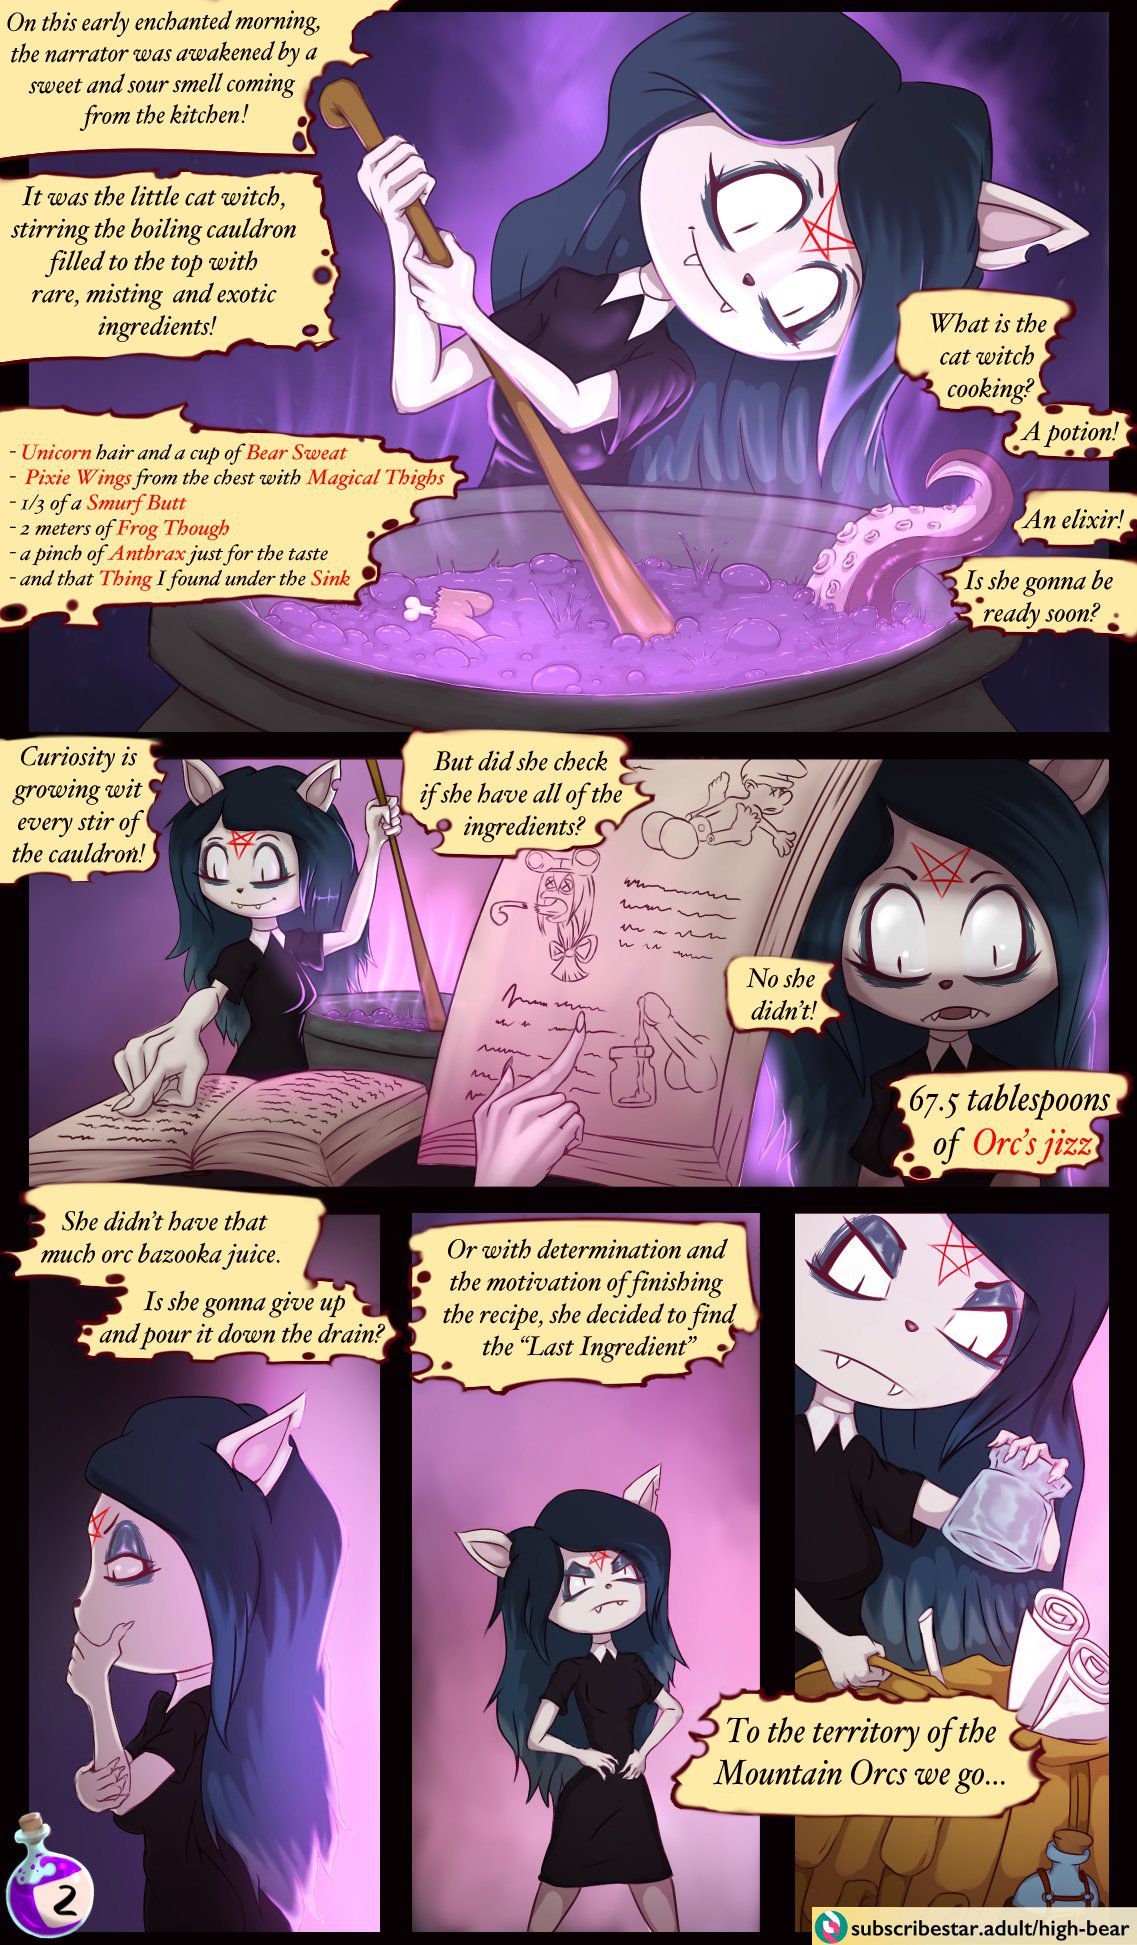 [HighBear15] The Empty Jar And The Hardworking Witch (The Summoning) (Ongoing) 3